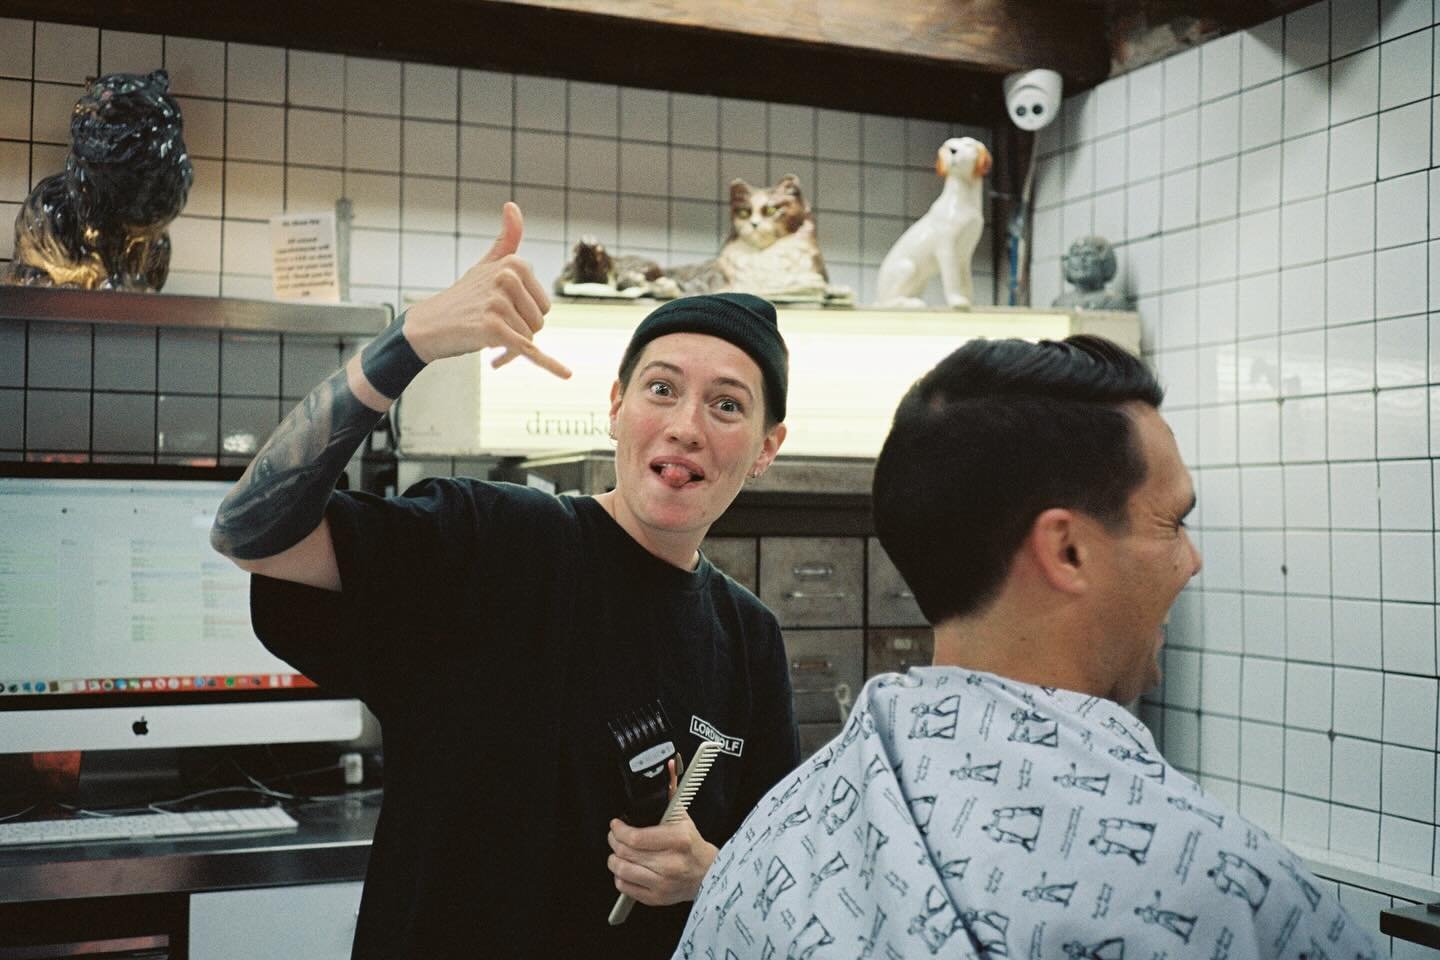 Thanks for bearing with us during our recent renovations! Big things coming x love DB

#drunkenbarber #barbershop #haveanicelife #fitzroy #melbournehair #filmisnotdead